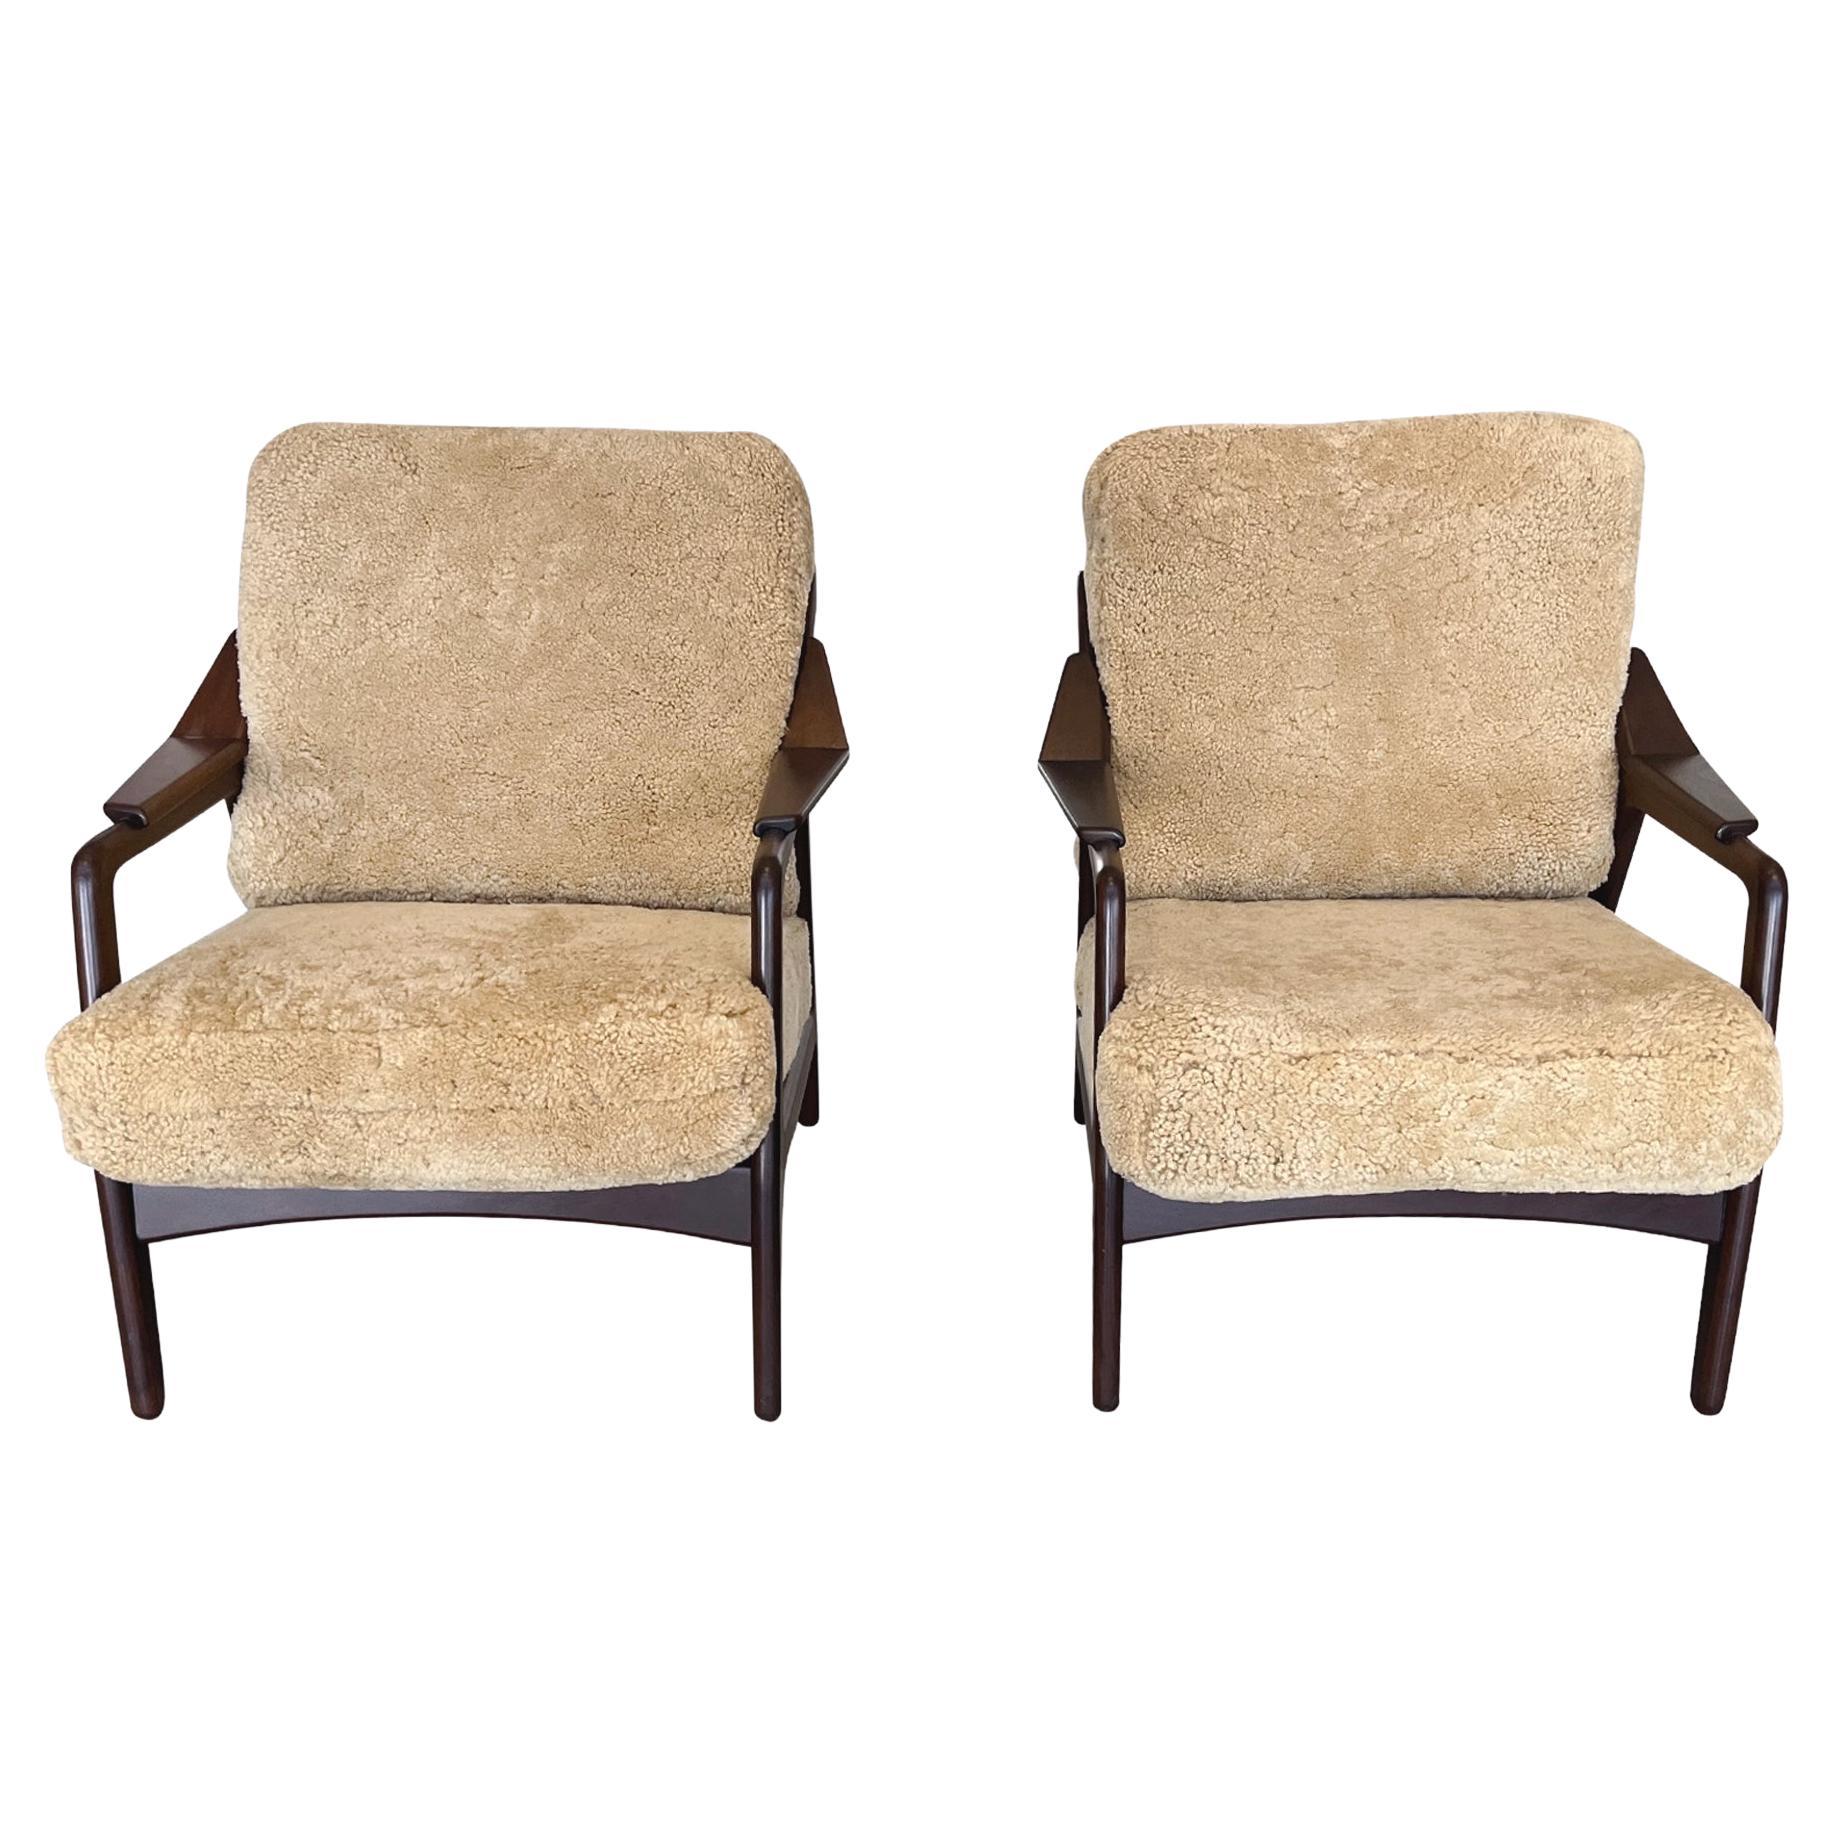 Pair of Danish Modern Lounge Chairs in Shearling by H. Brockmann-Petersen